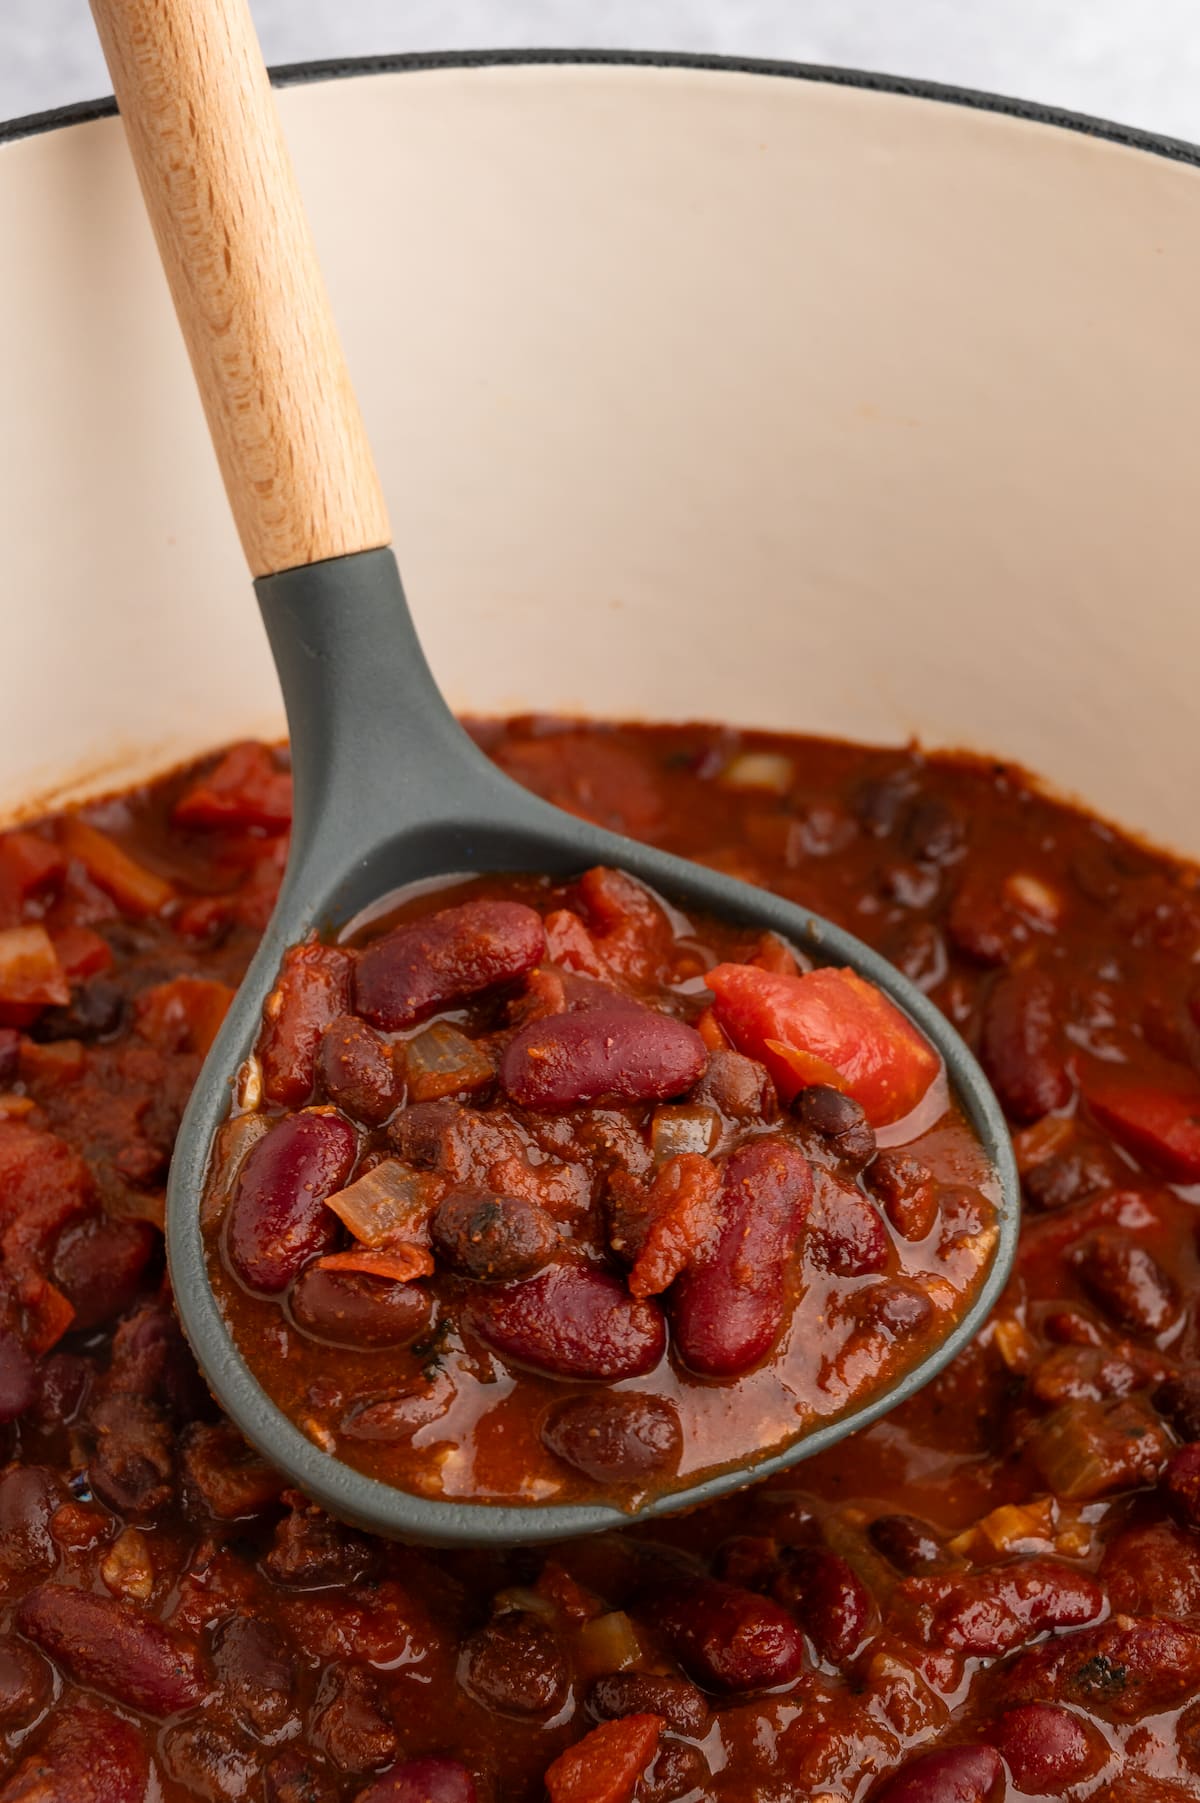 A ladle scooping up some vegan chili from the pot.